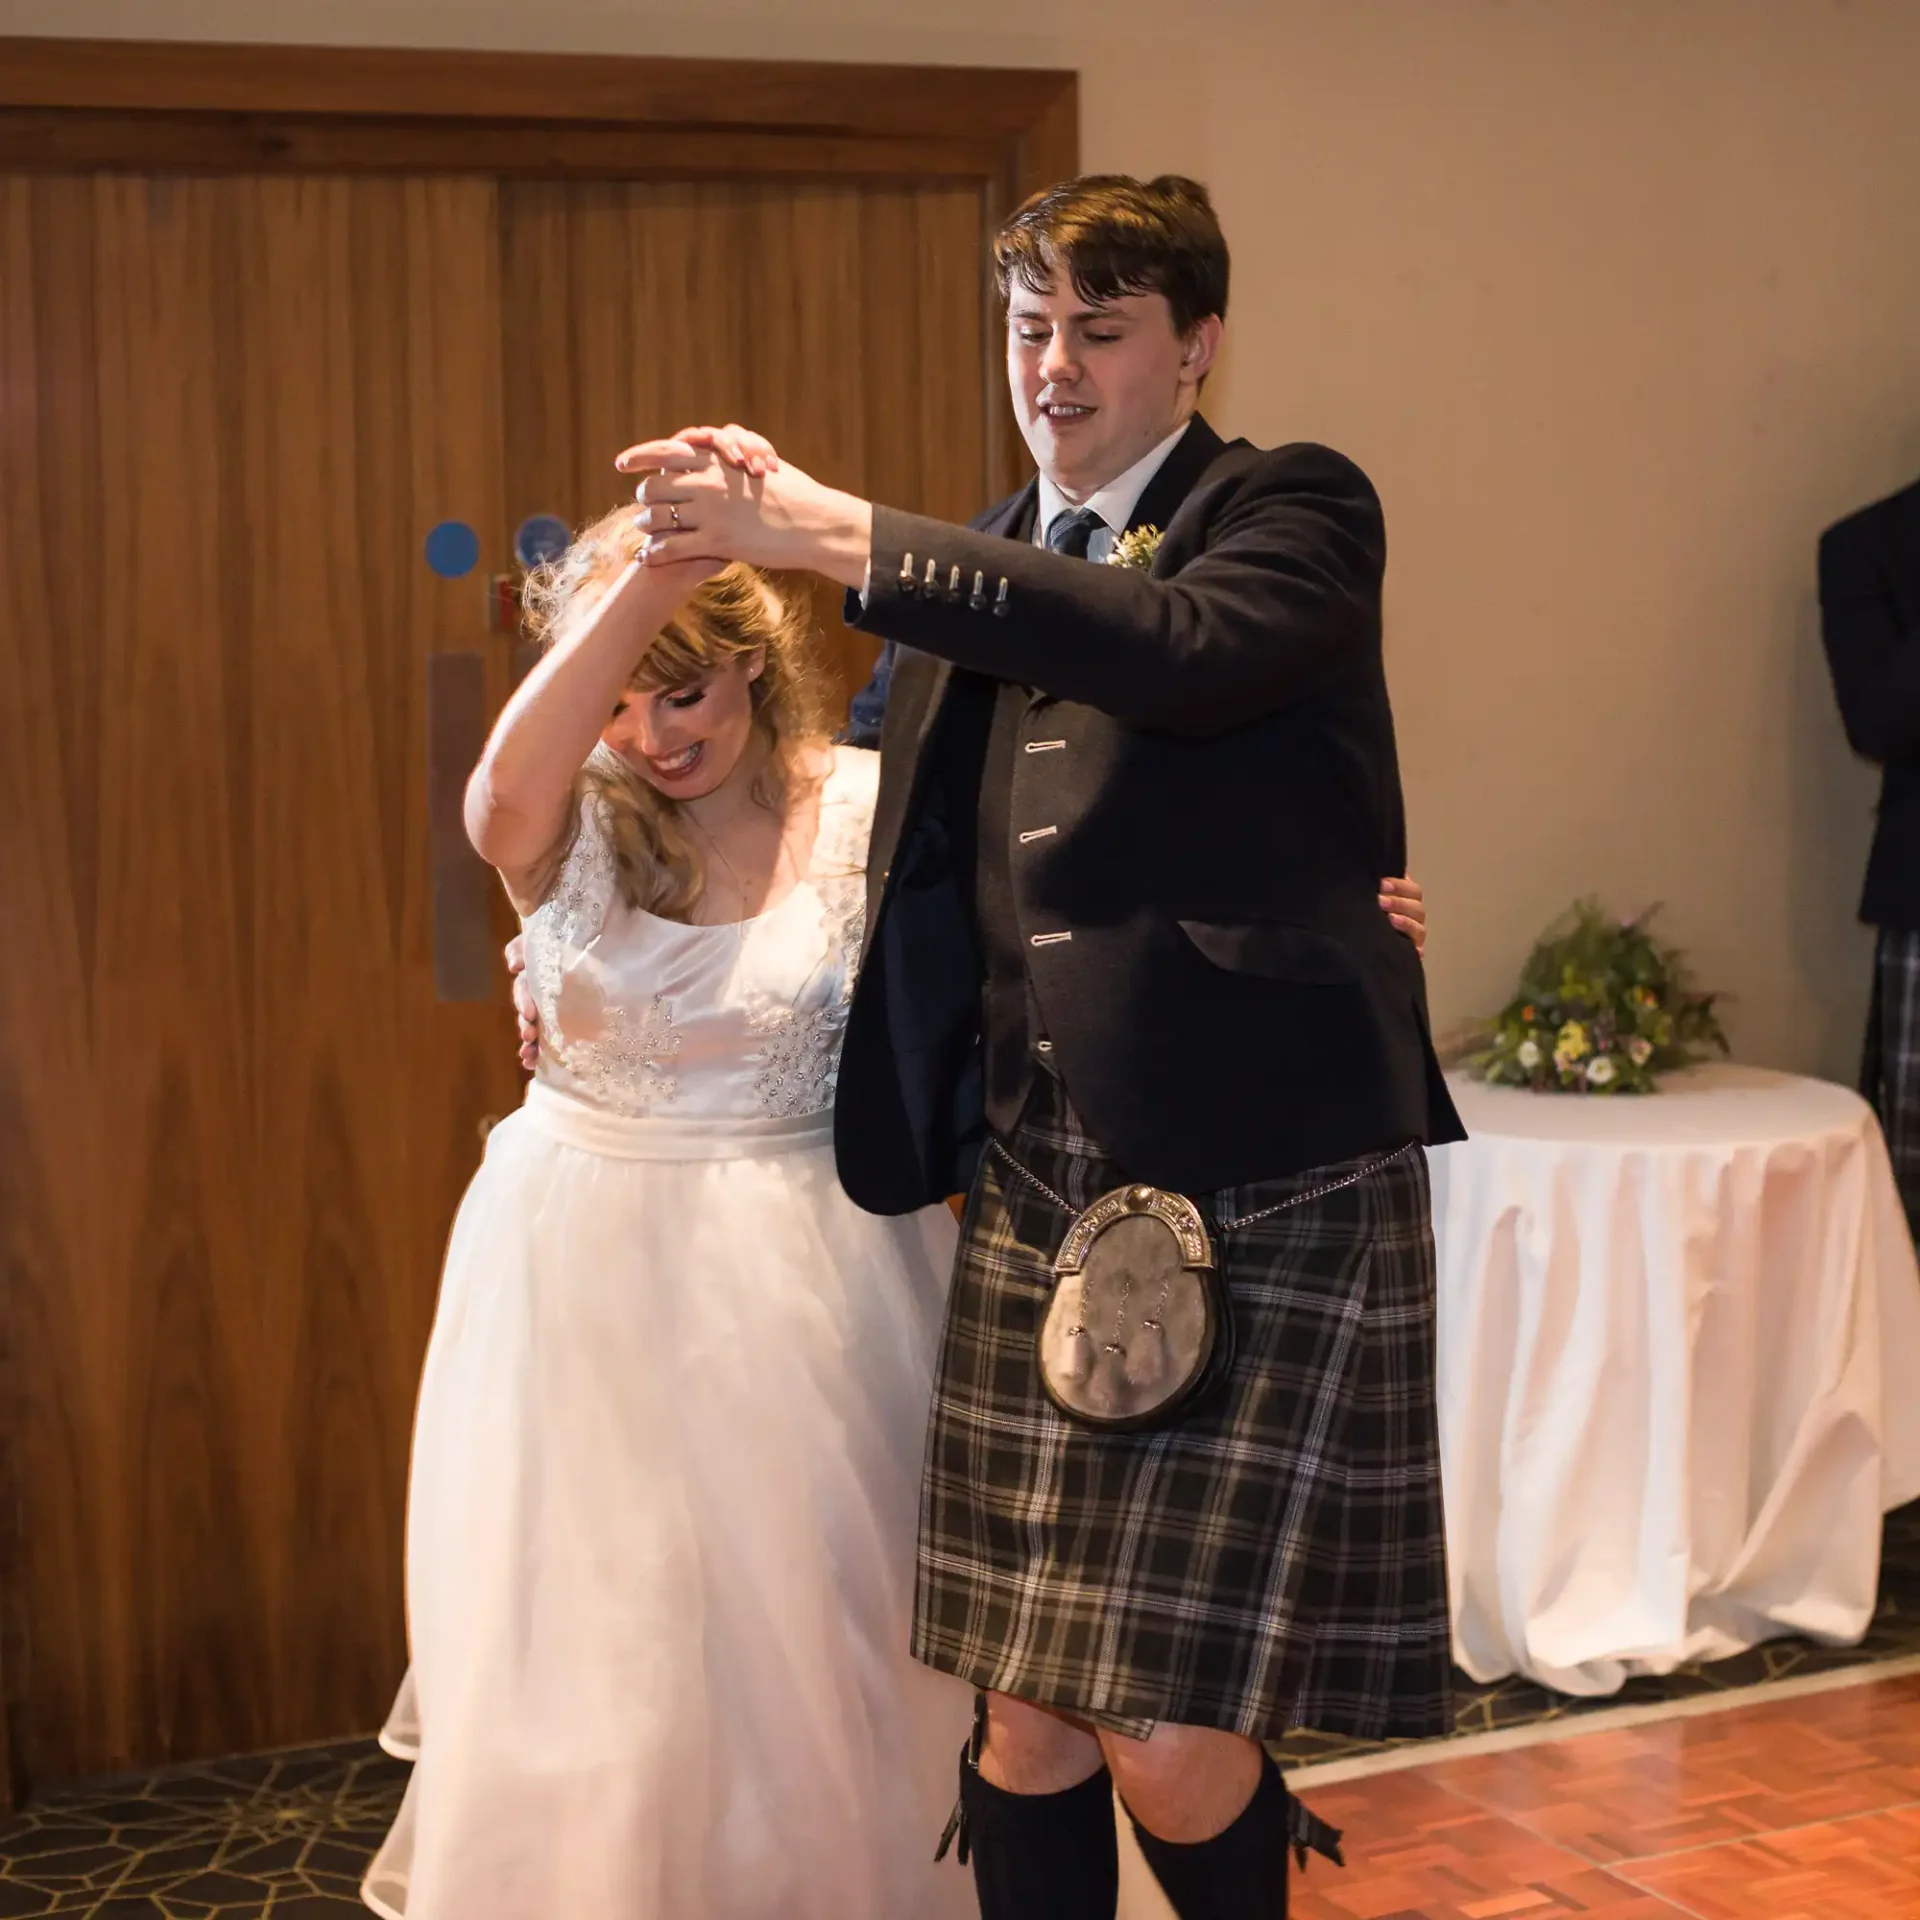 A bride and groom in traditional scottish attire dancing joyfully at their wedding reception.